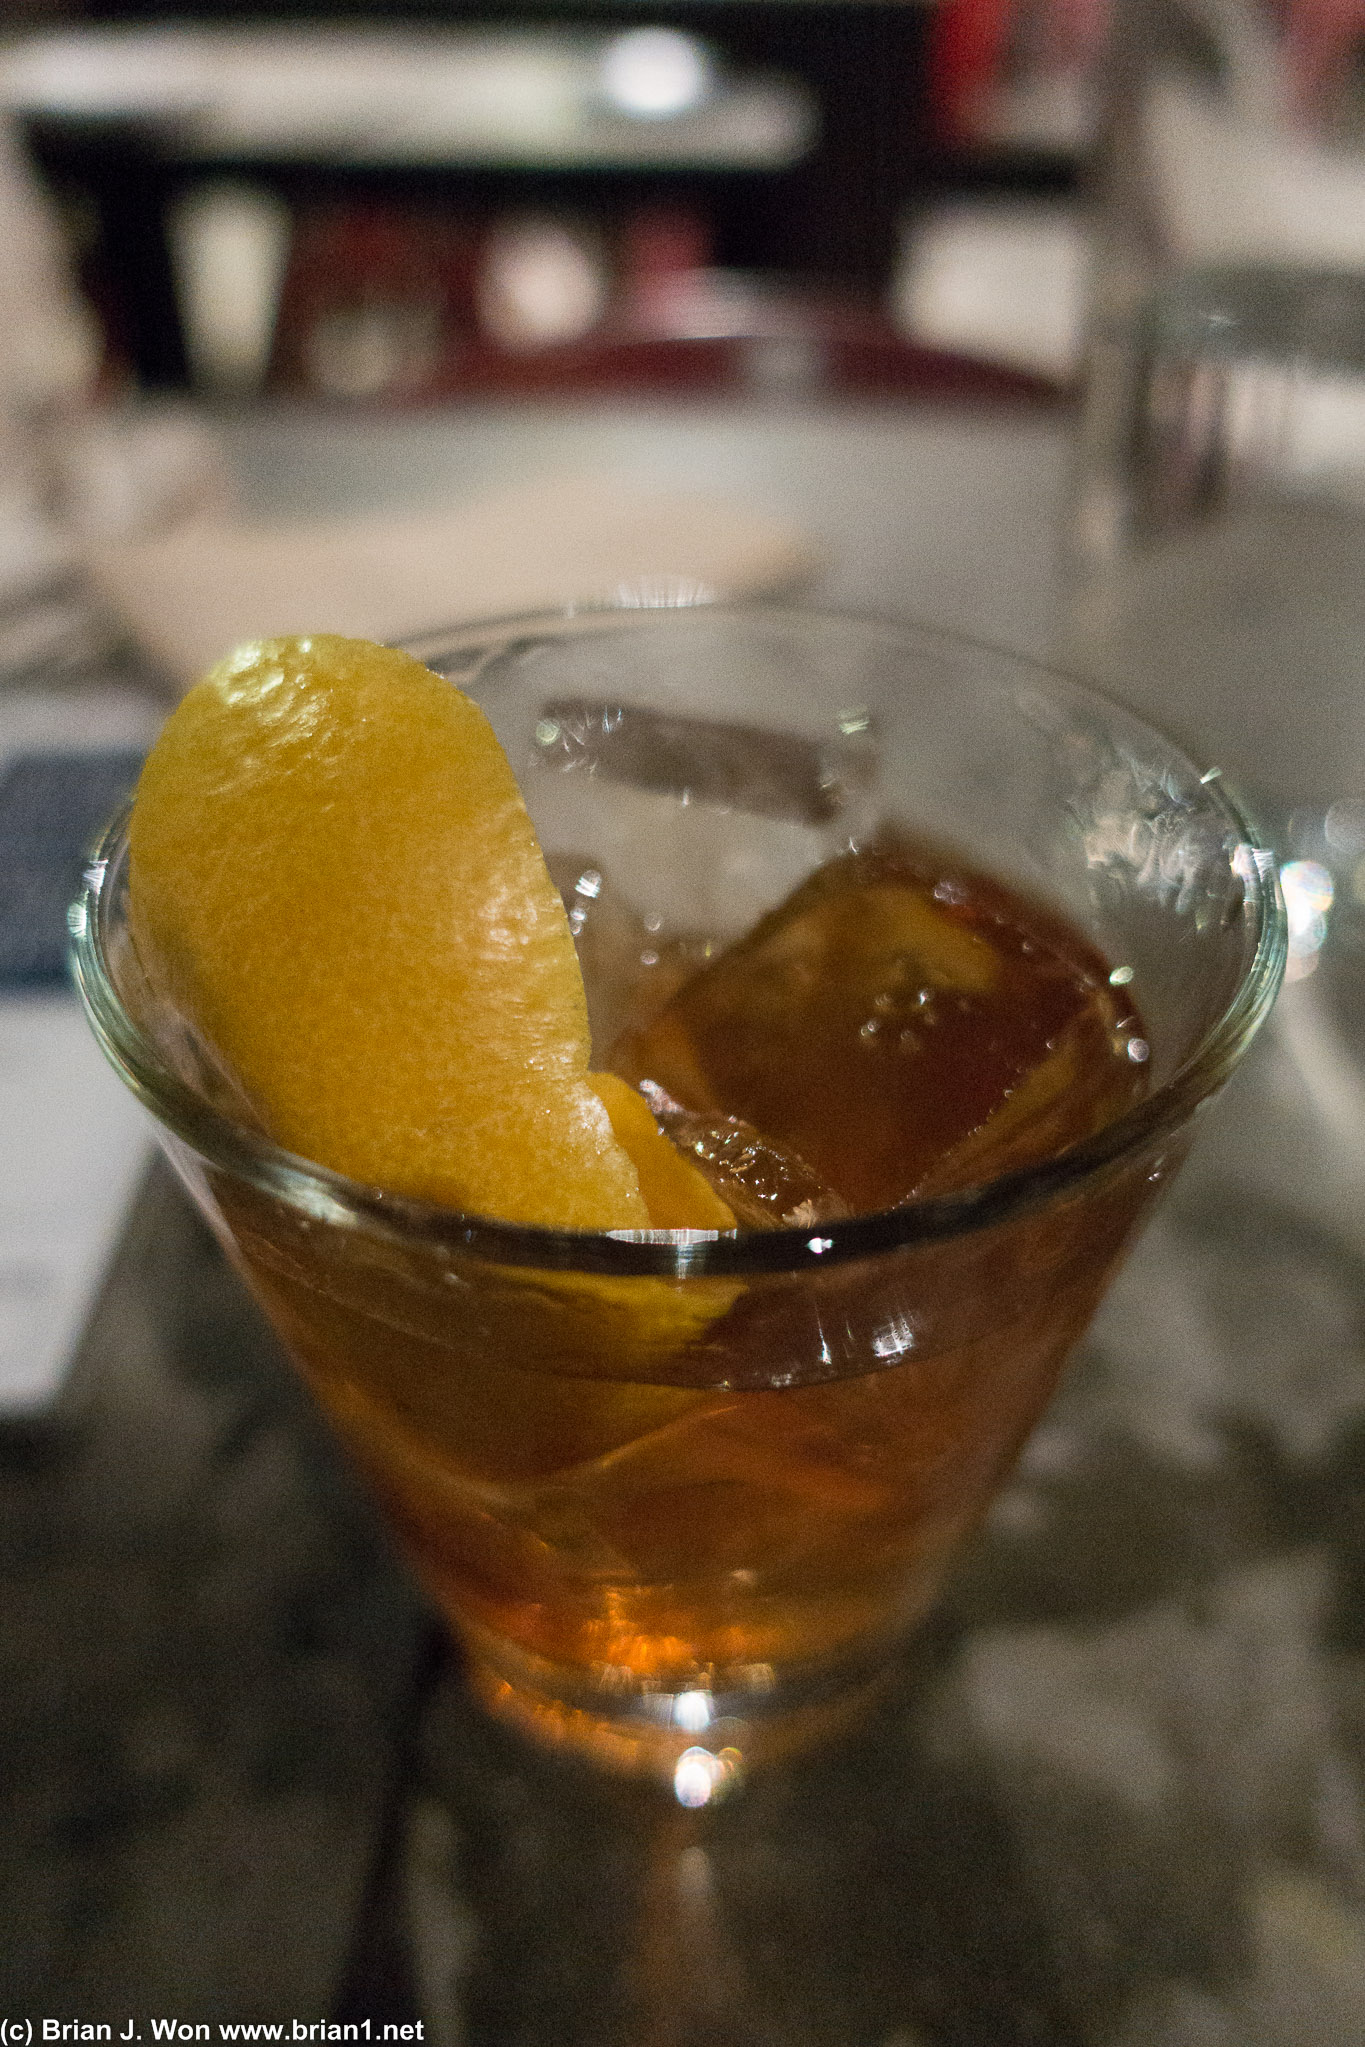 Slow n' low old fashioned.